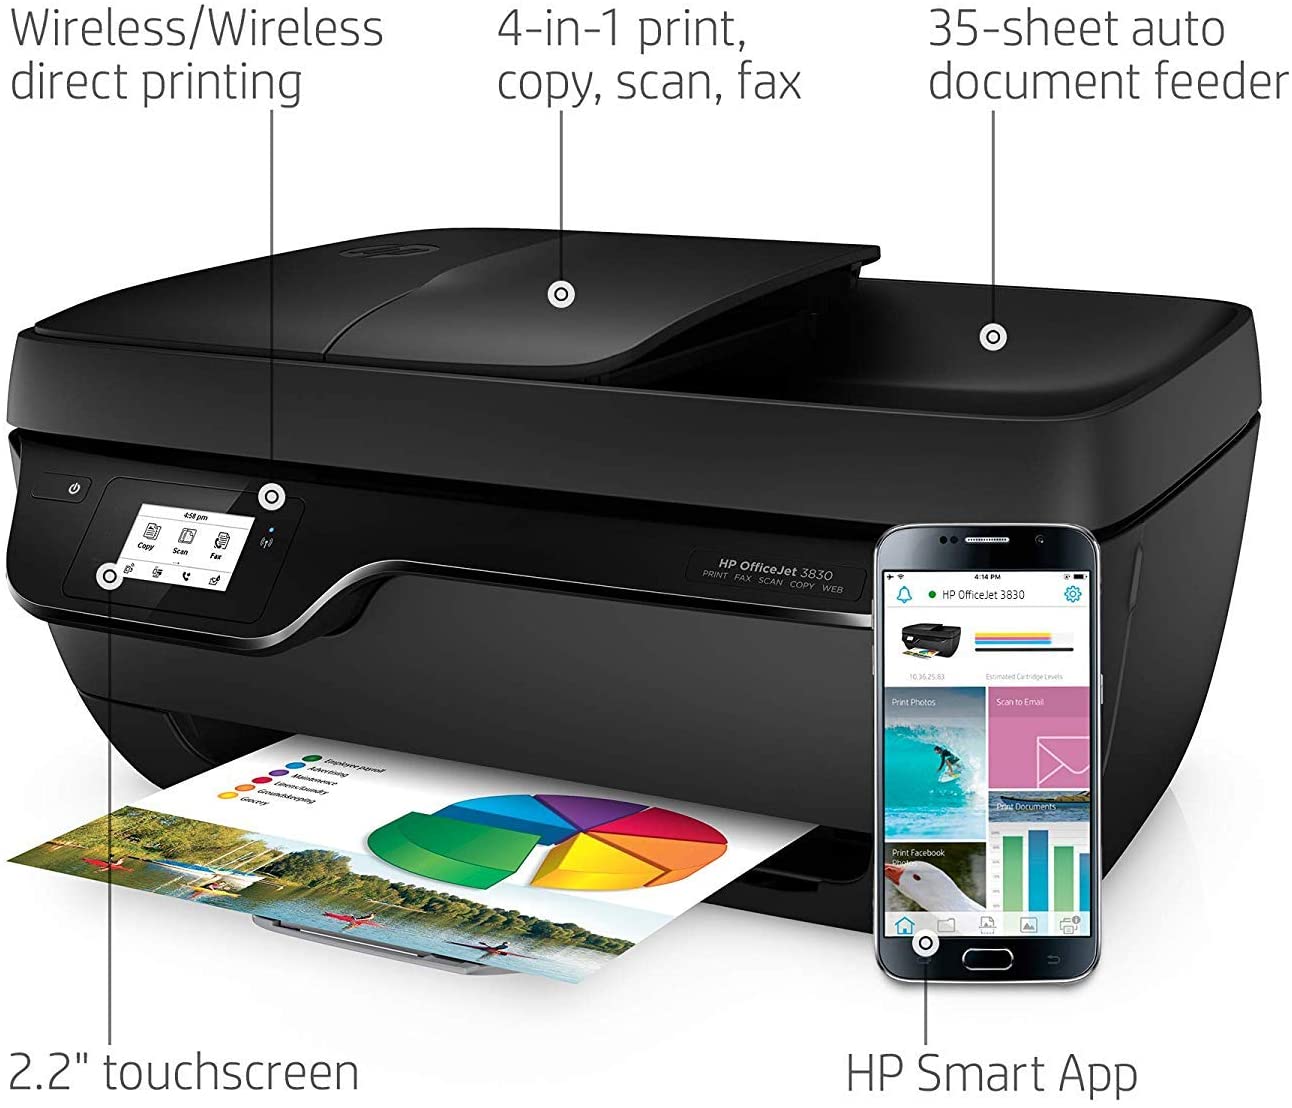 HP OfficeJet 3830 All-in-One Wireless Printer : print, copy,scan, fax (K7V40A) - image 1 of 4